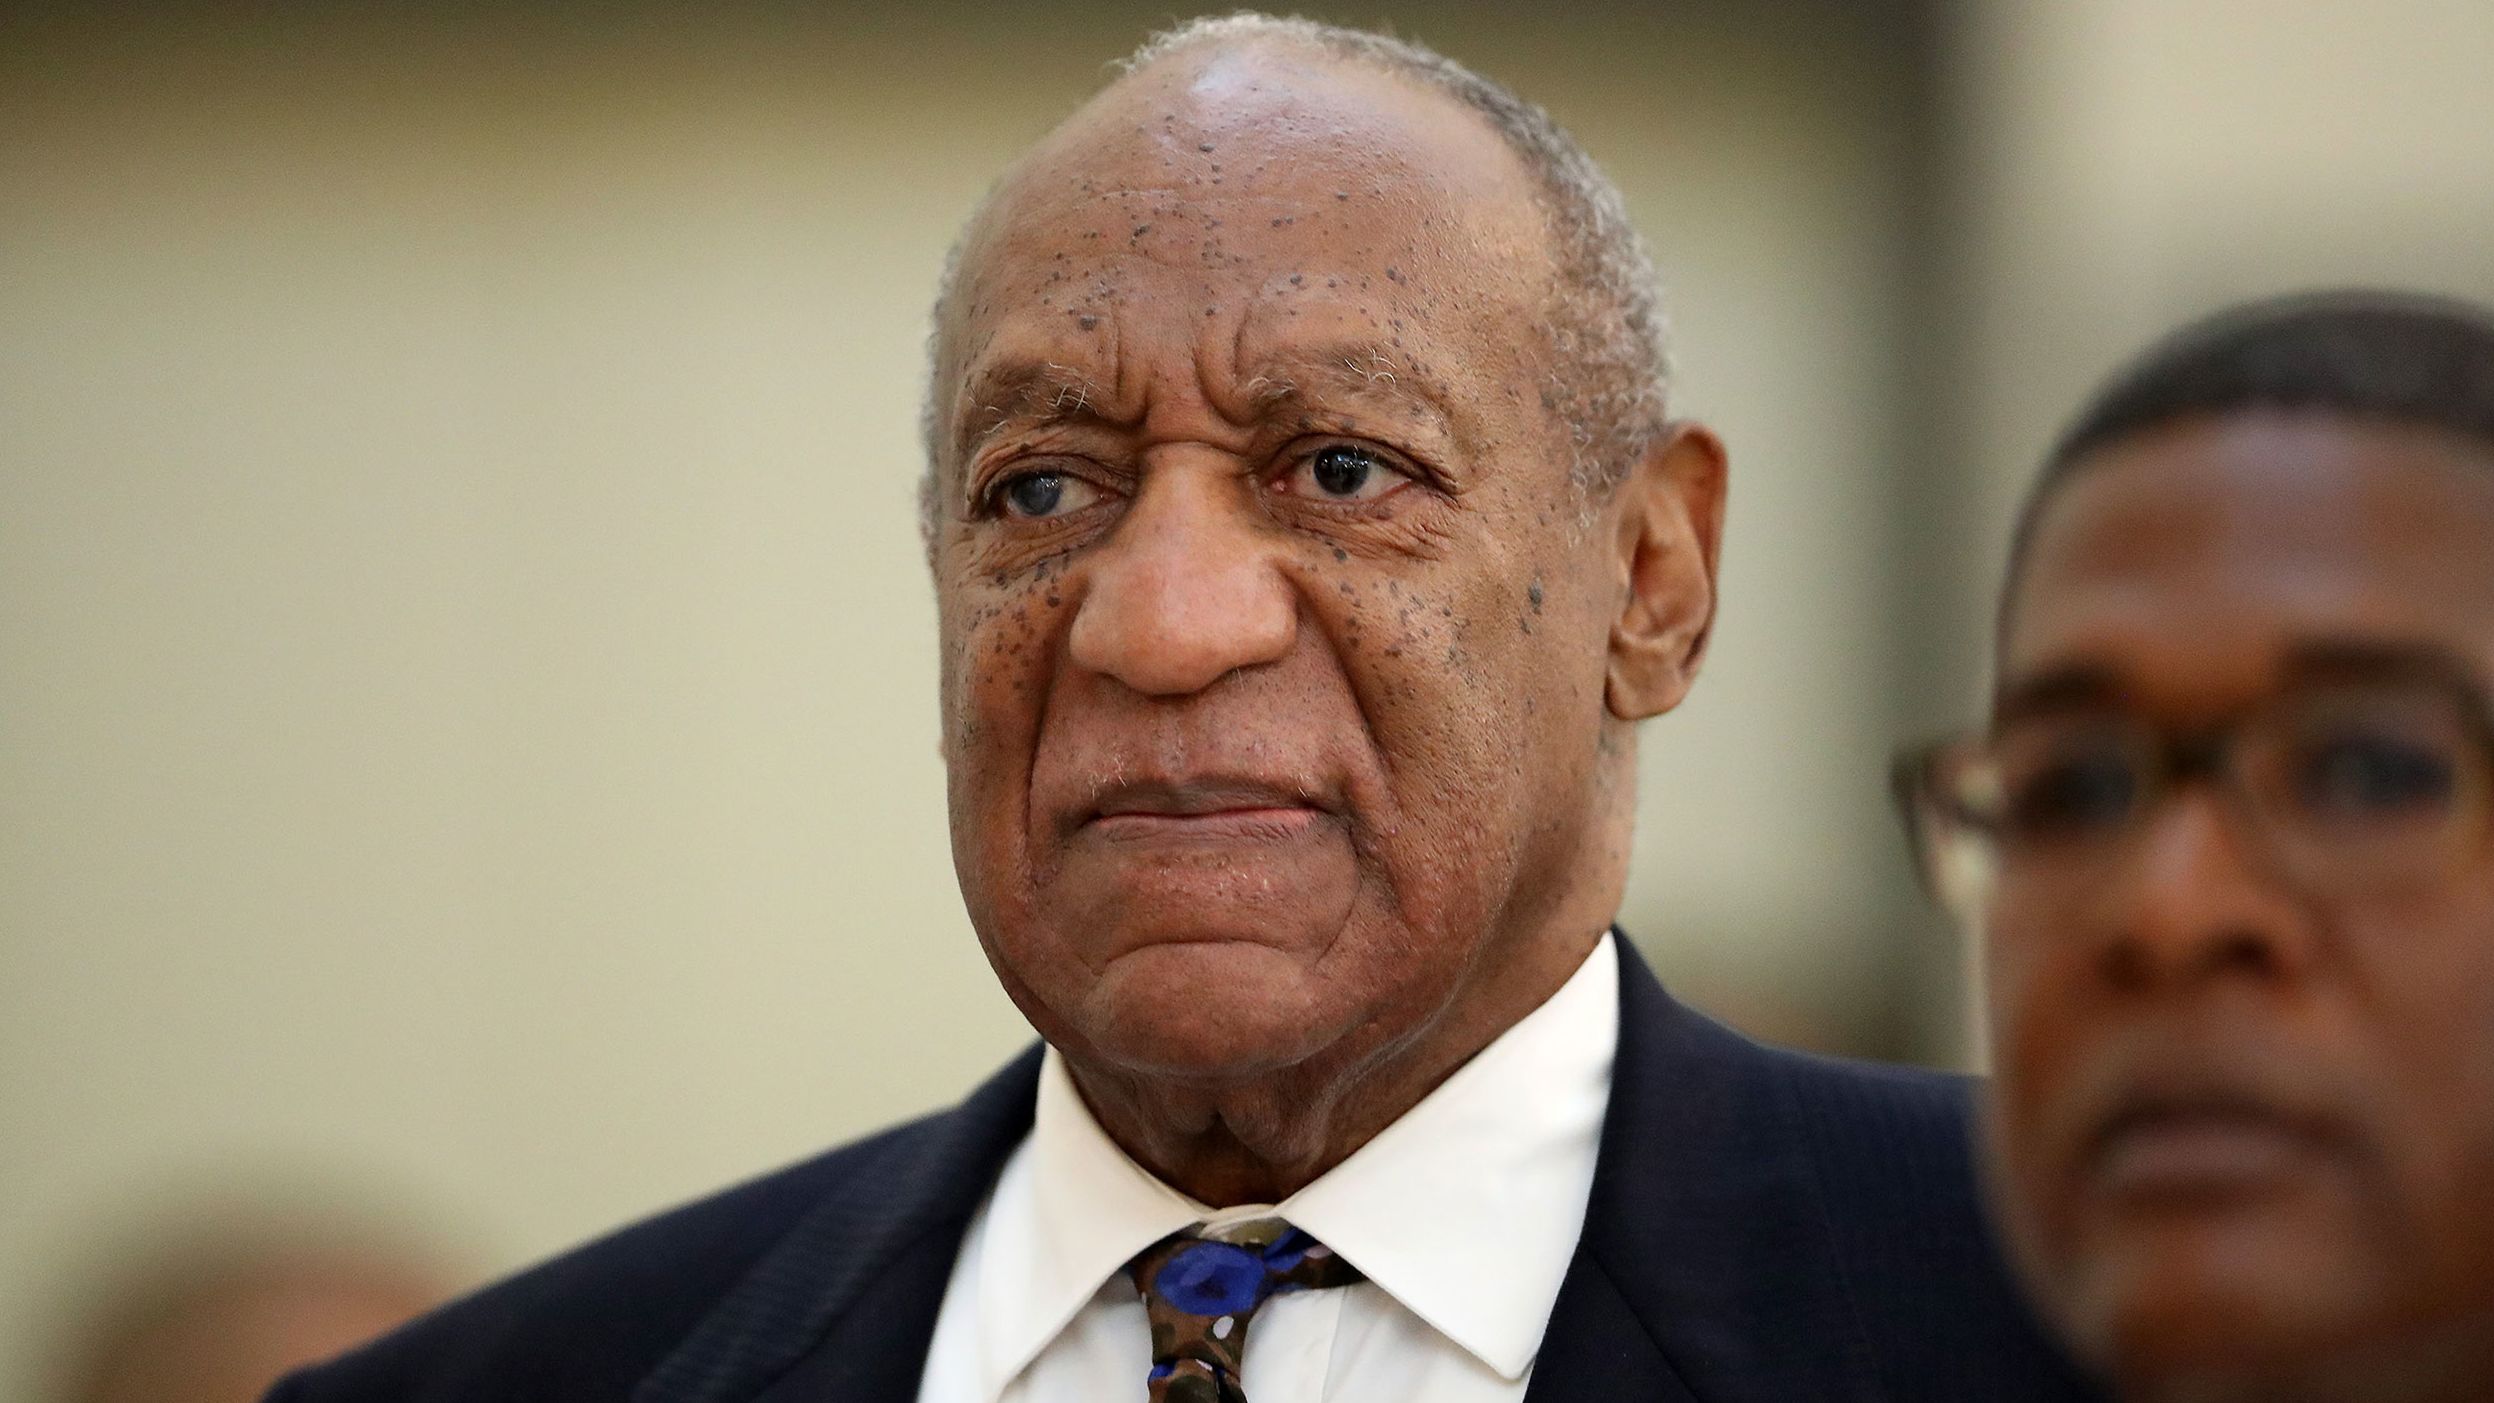 Actor and comedian Bill Cosby's 2018 conviction on charges of sexual assault was overturned in 2021 by the Pennsylvania Supreme Court.